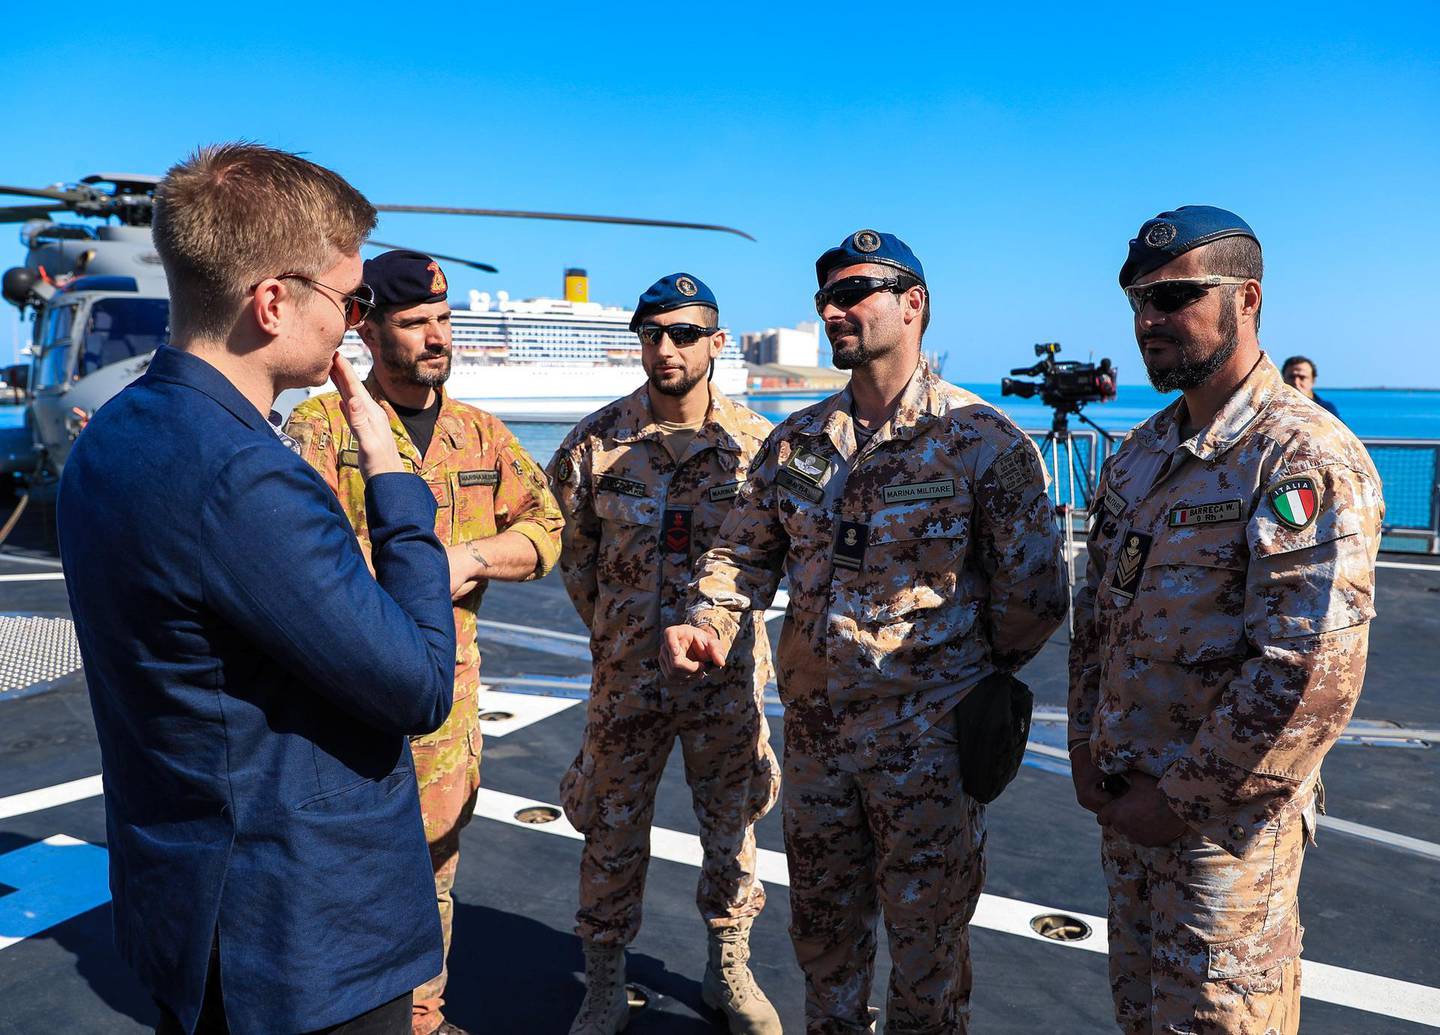 Abu Dhabi, U.A.E., February 14, 2019.  European Multi-Mission Frigate (FREMM), Carlo Margottini has docked at the Abu Dhabi Port with Commander Marco Guerriero.  The National Reporter, Charlie Mitchell interviews some members of the Italian Special Forces group on the frigate.Victor Besa/The NationalSection:  NAReporter:  Charlie Mitchell